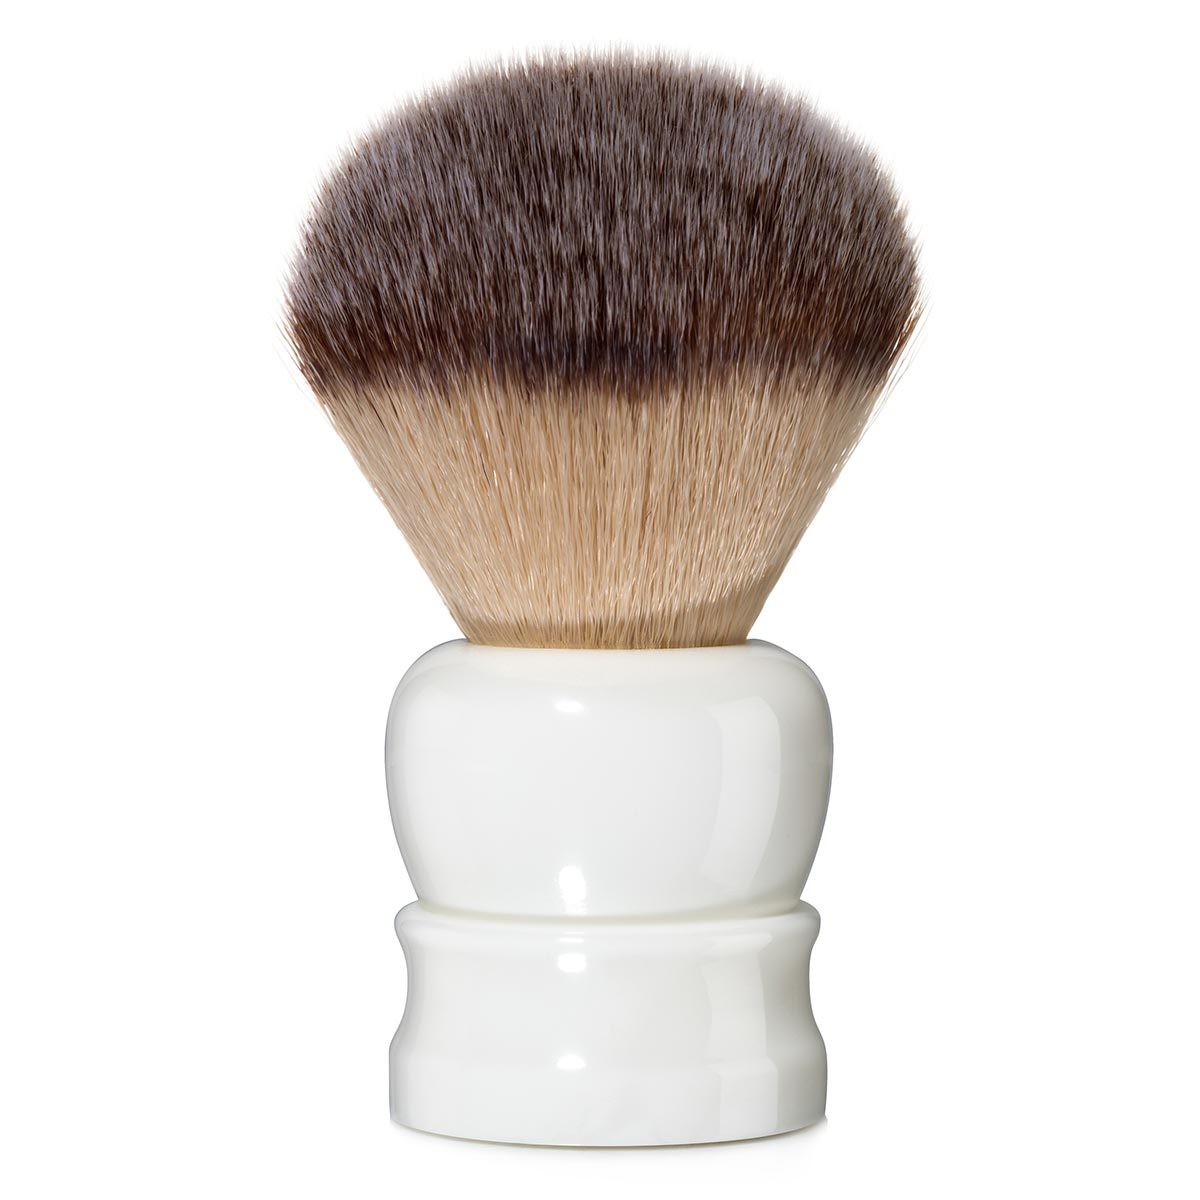 Primary image of Fine Accoutrements Stout Angel Hair Shave Brush - White 24mm Shave Brush